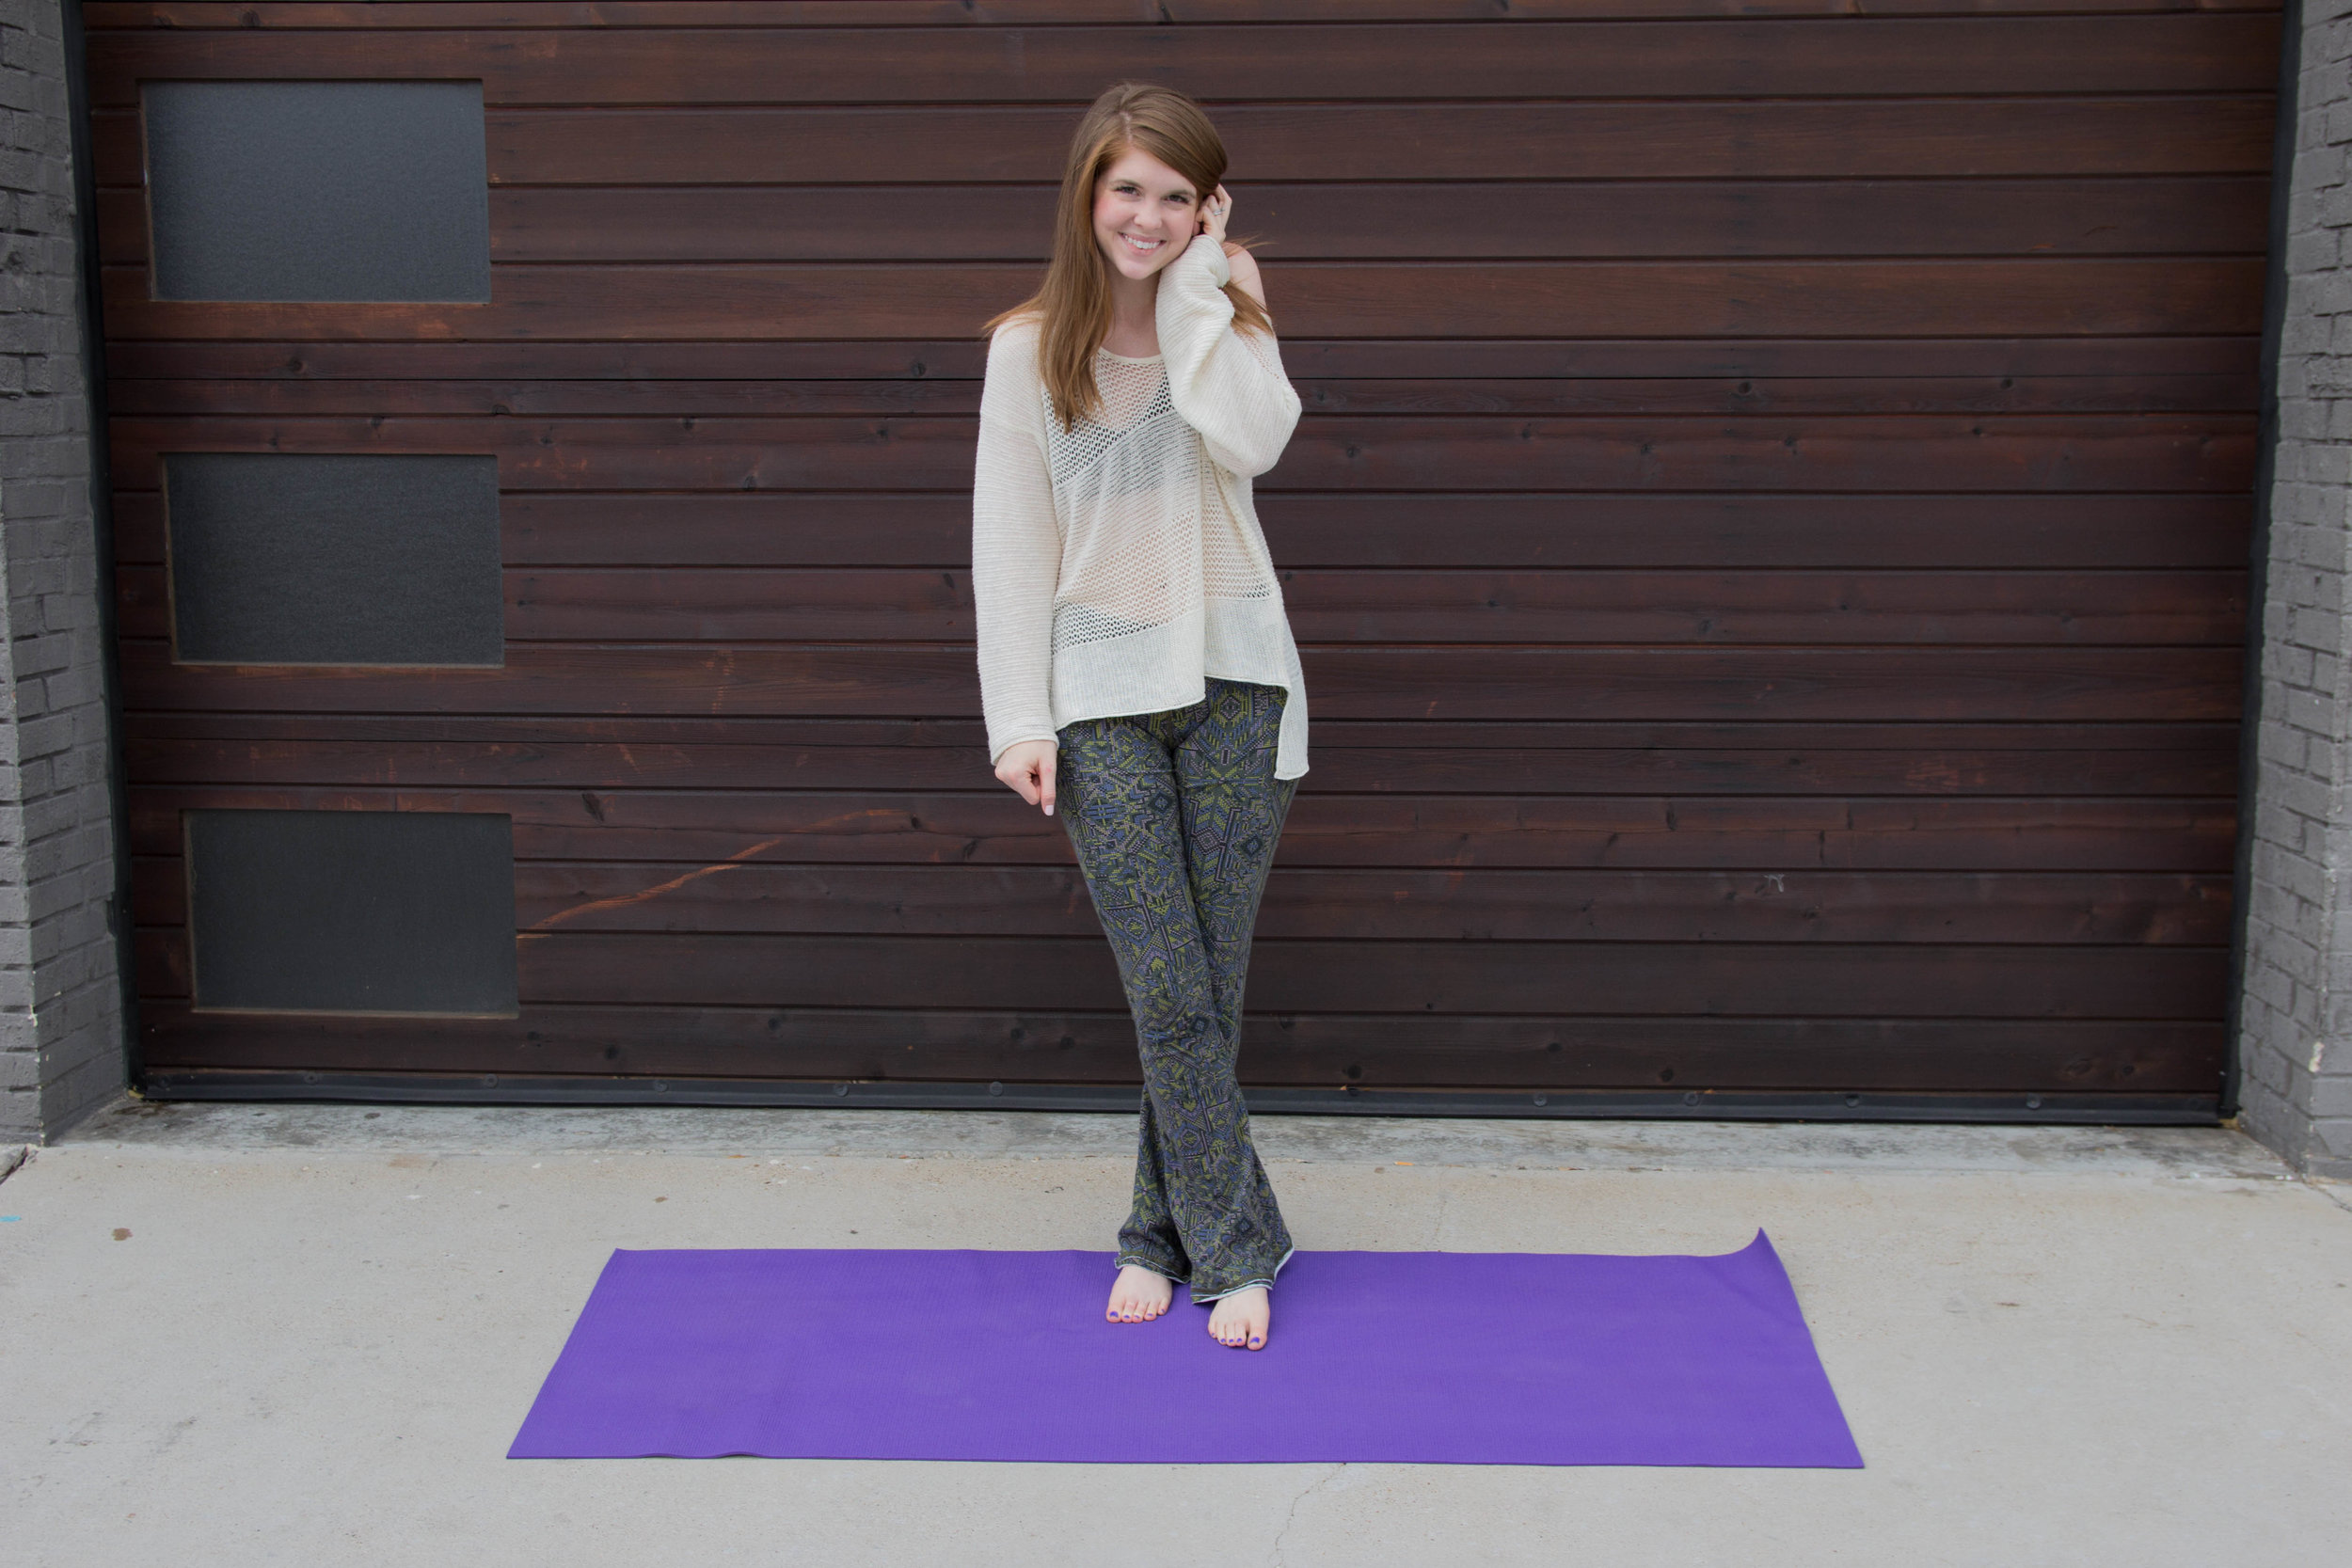 Yoga, Becoming Complacent, and prAna Clothing